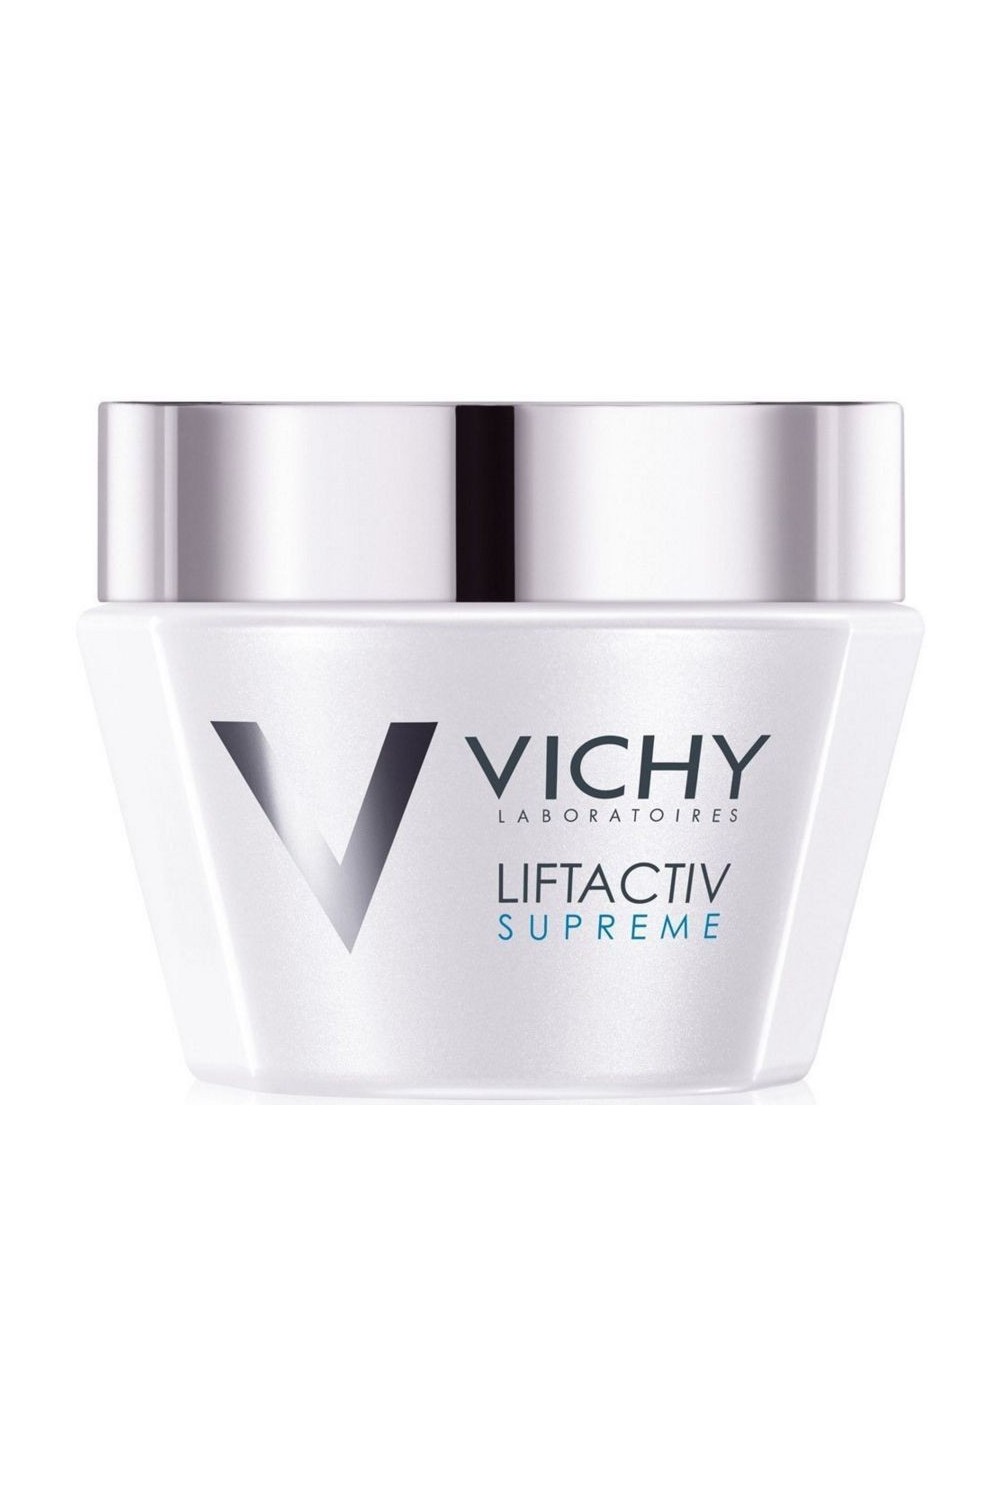 Vichy Liftactiv Supreme Day Cream For Dry Skin 50ml